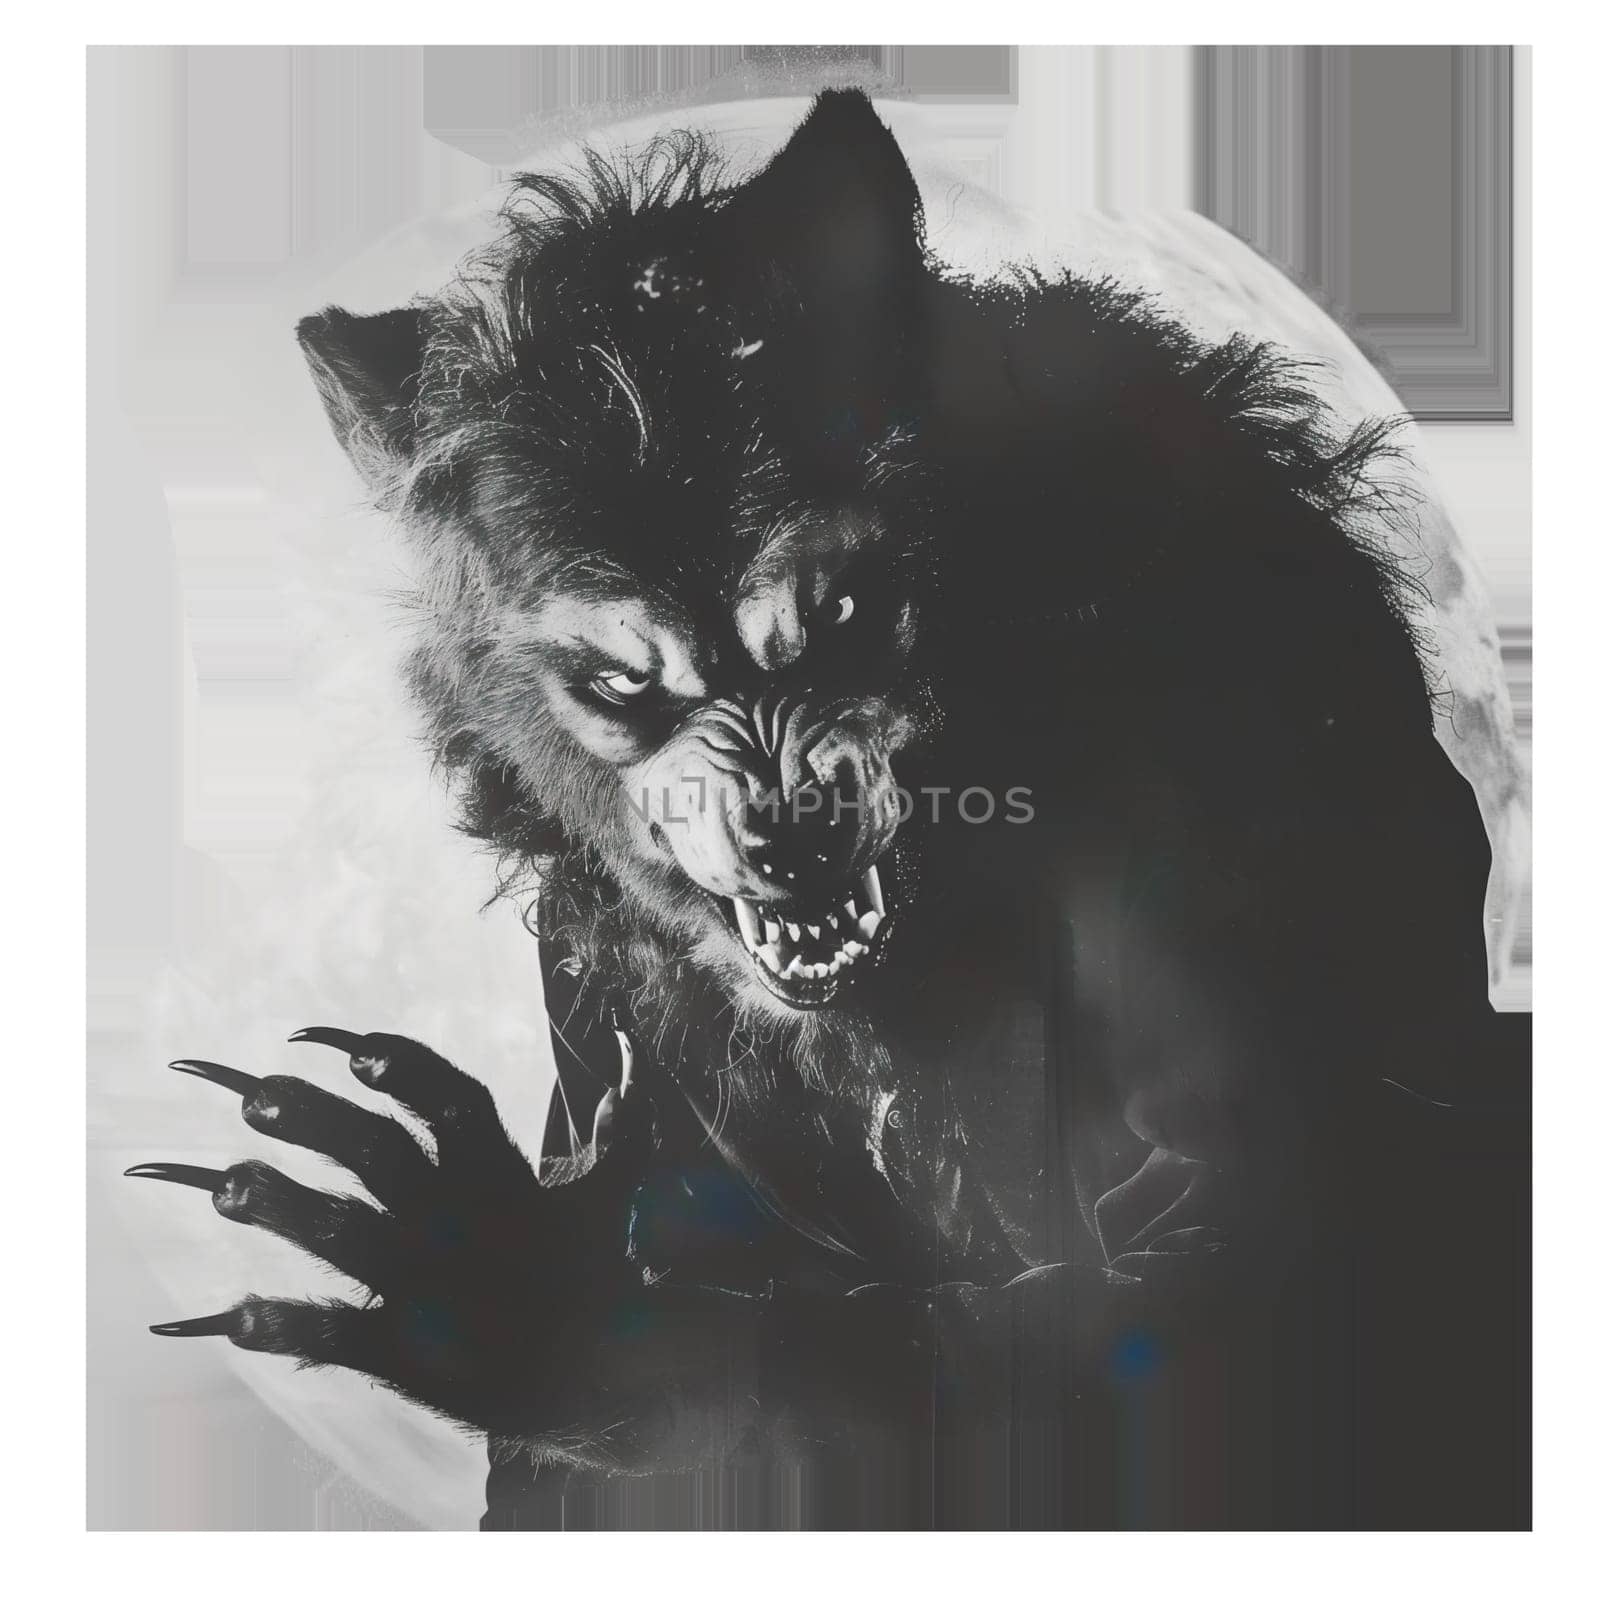 Monochrome vintage photo of halloween Werewolf cut out image by Dustick